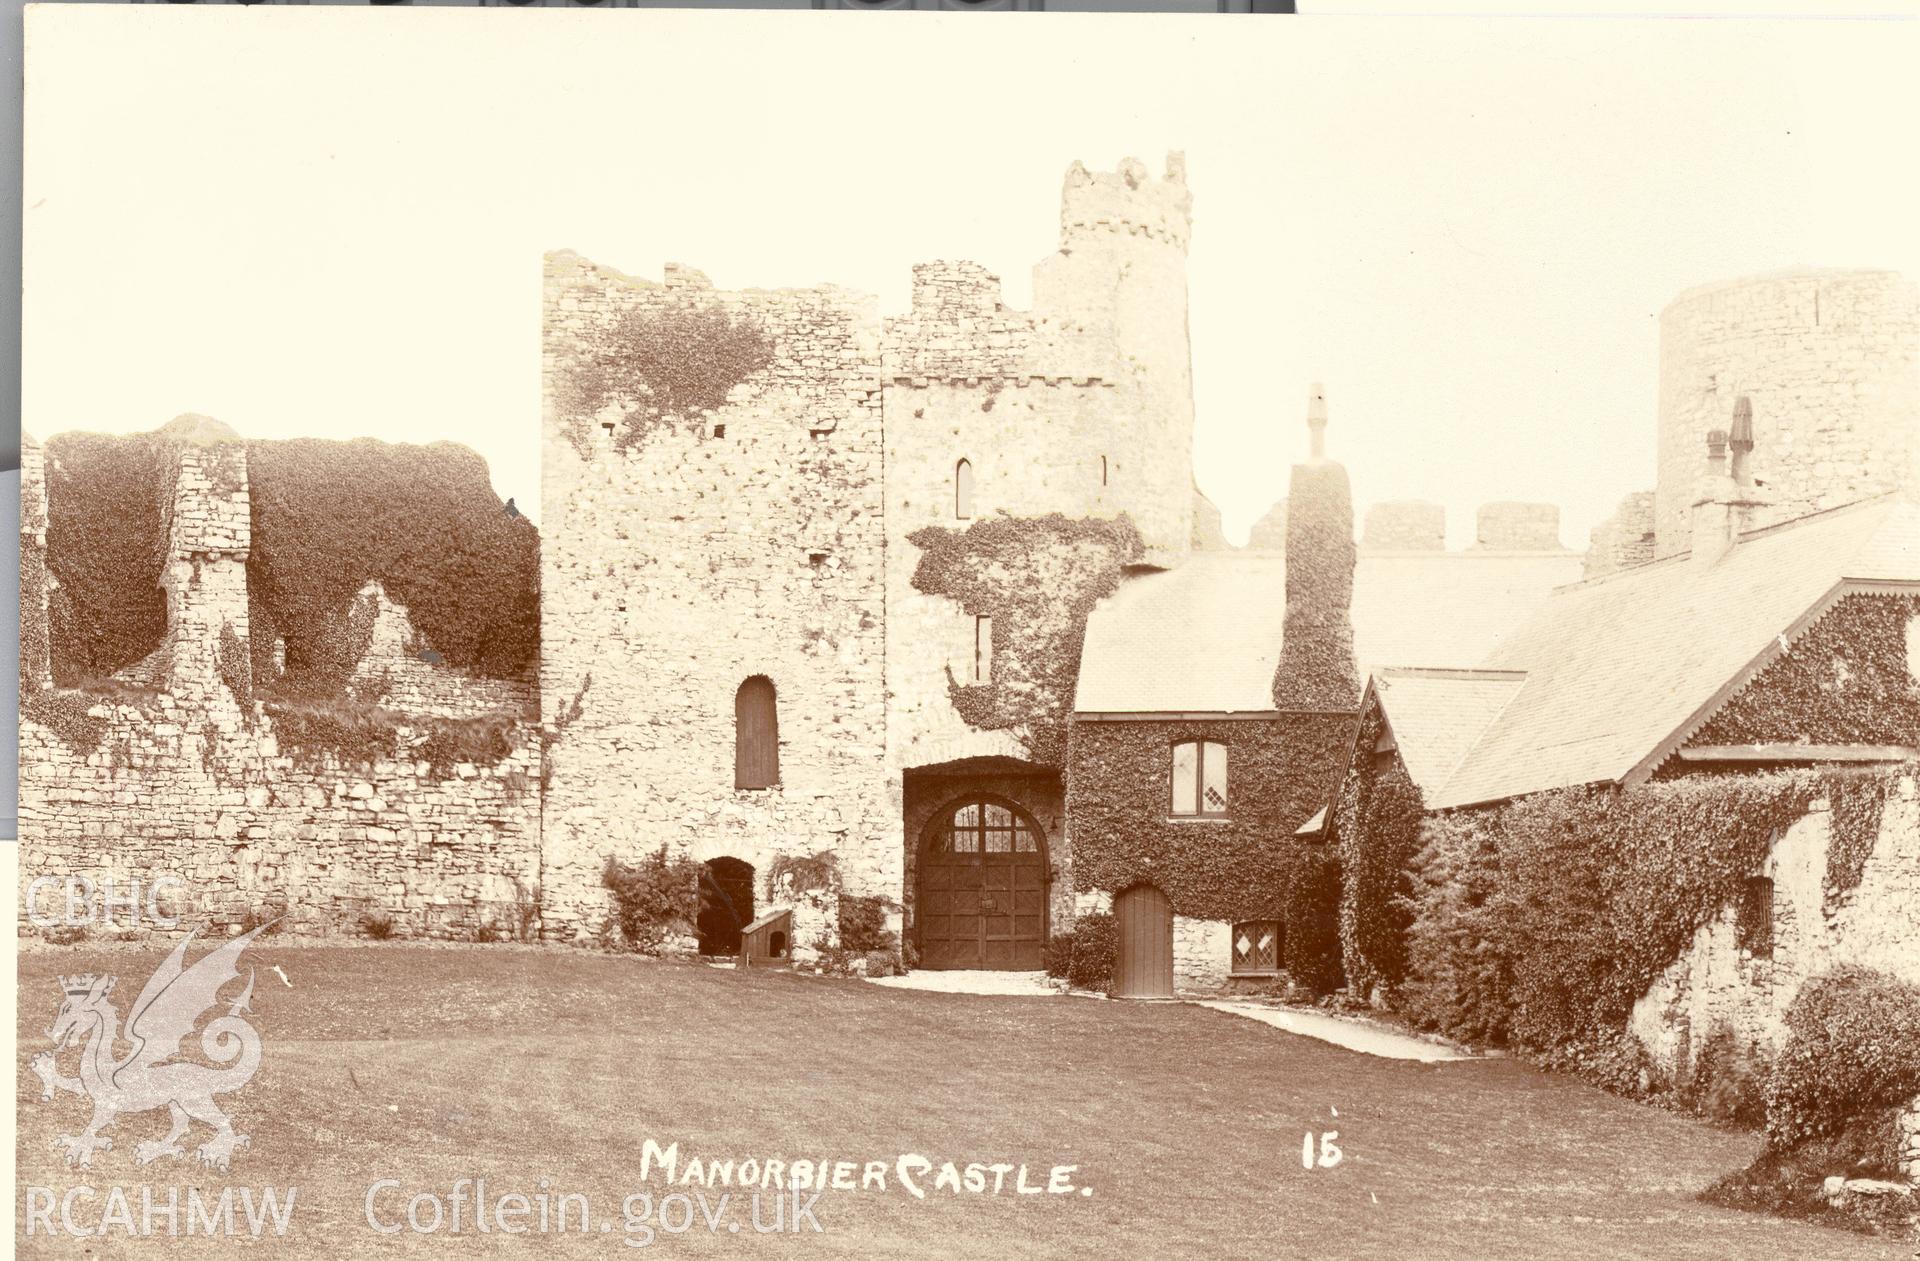 Digitised postcard image of Manorbier Castle, H. Mortimer Allen, Tenby. Produced by Parks and Gardens Data Services, from an original item in the Peter Davis Collection at Parks and Gardens UK. We hold only web-resolution images of this collection, suitable for viewing on screen and for research purposes only. We do not hold the original images, or publication quality scans.